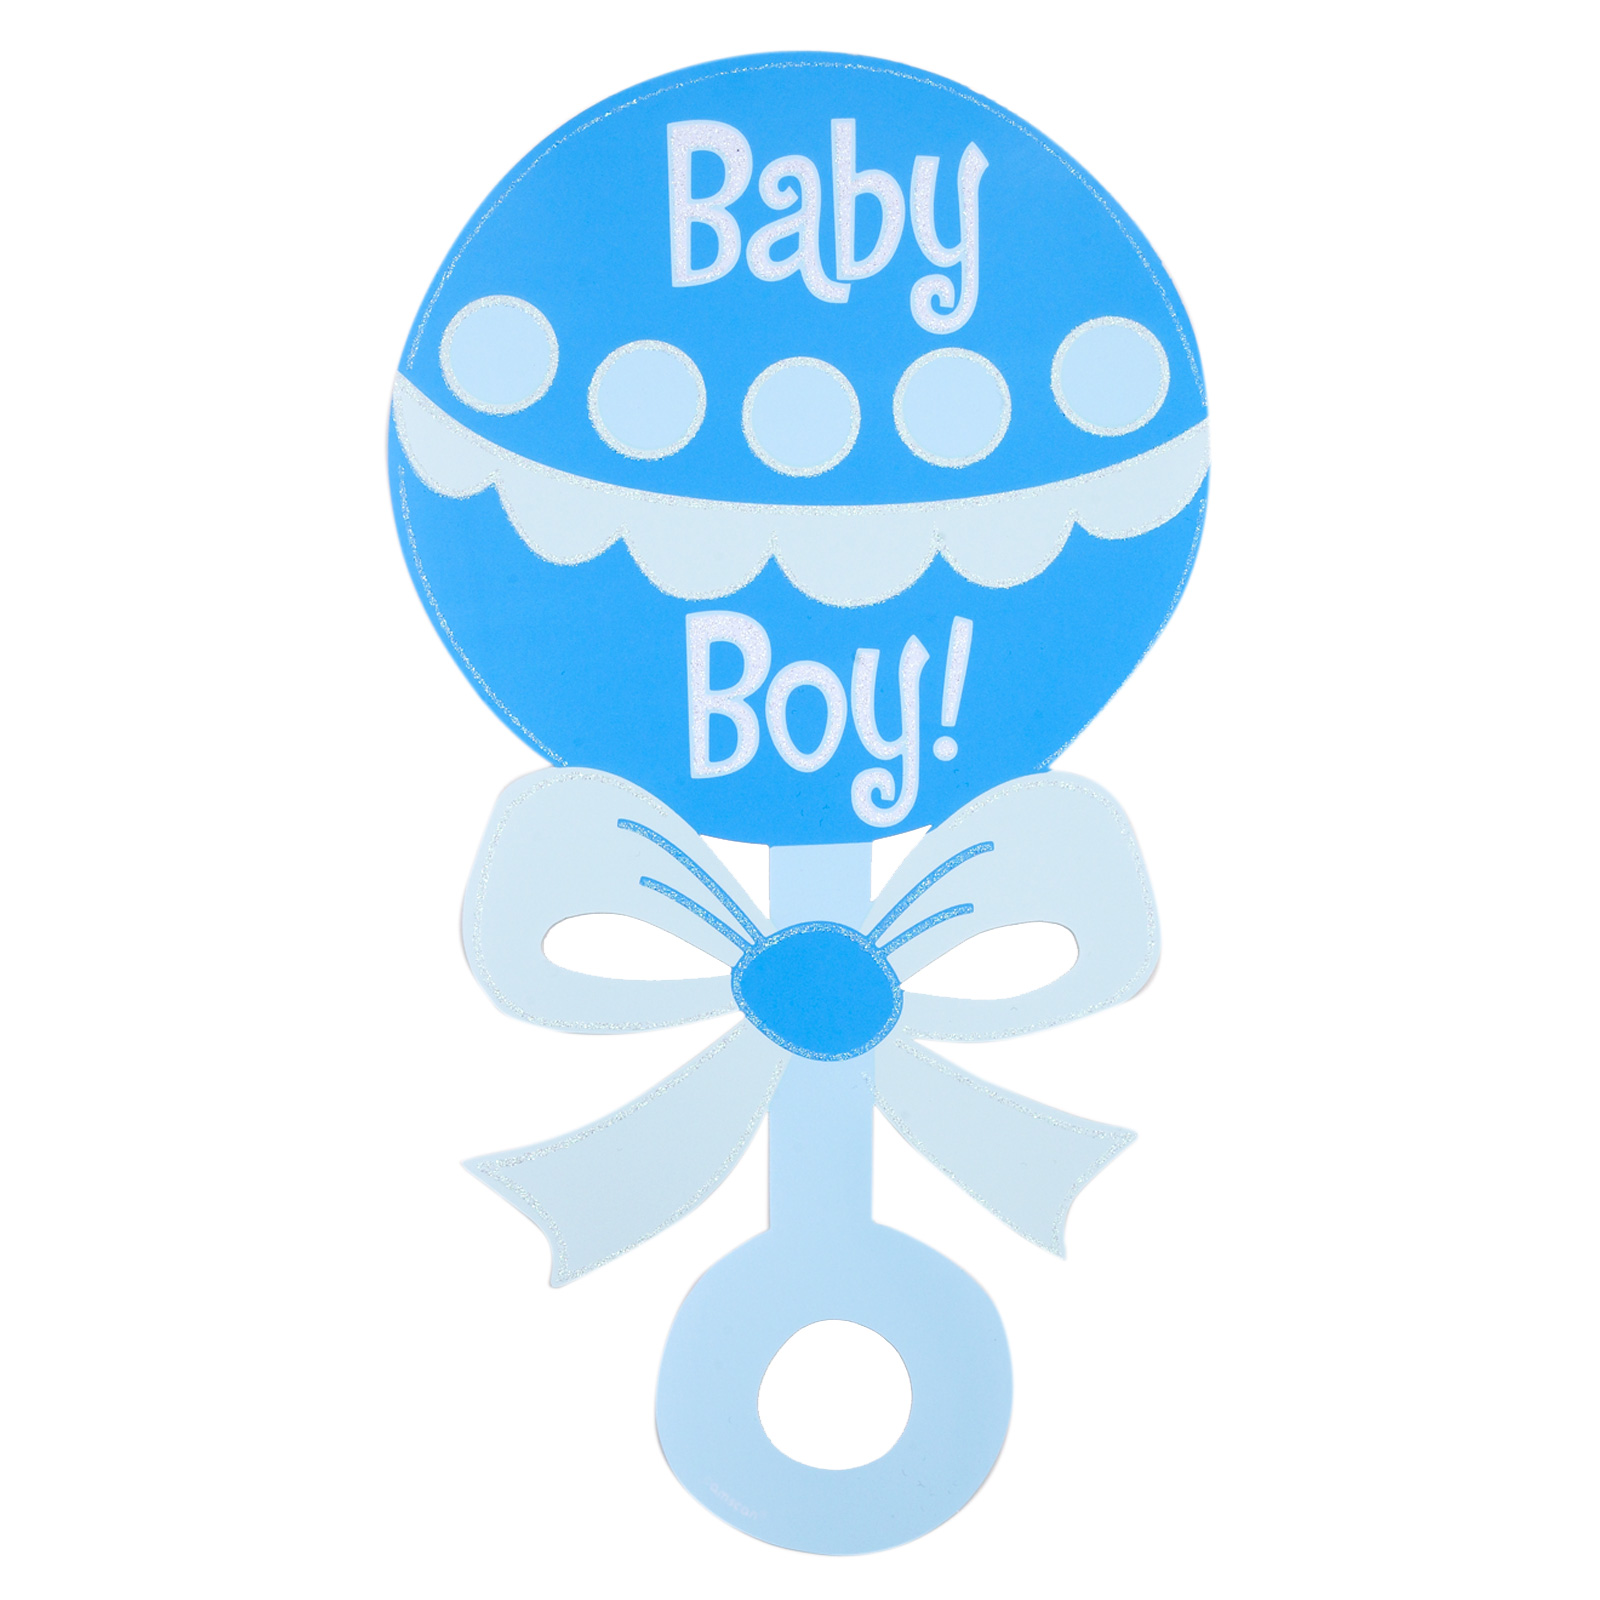 Baby rattle clipart 2